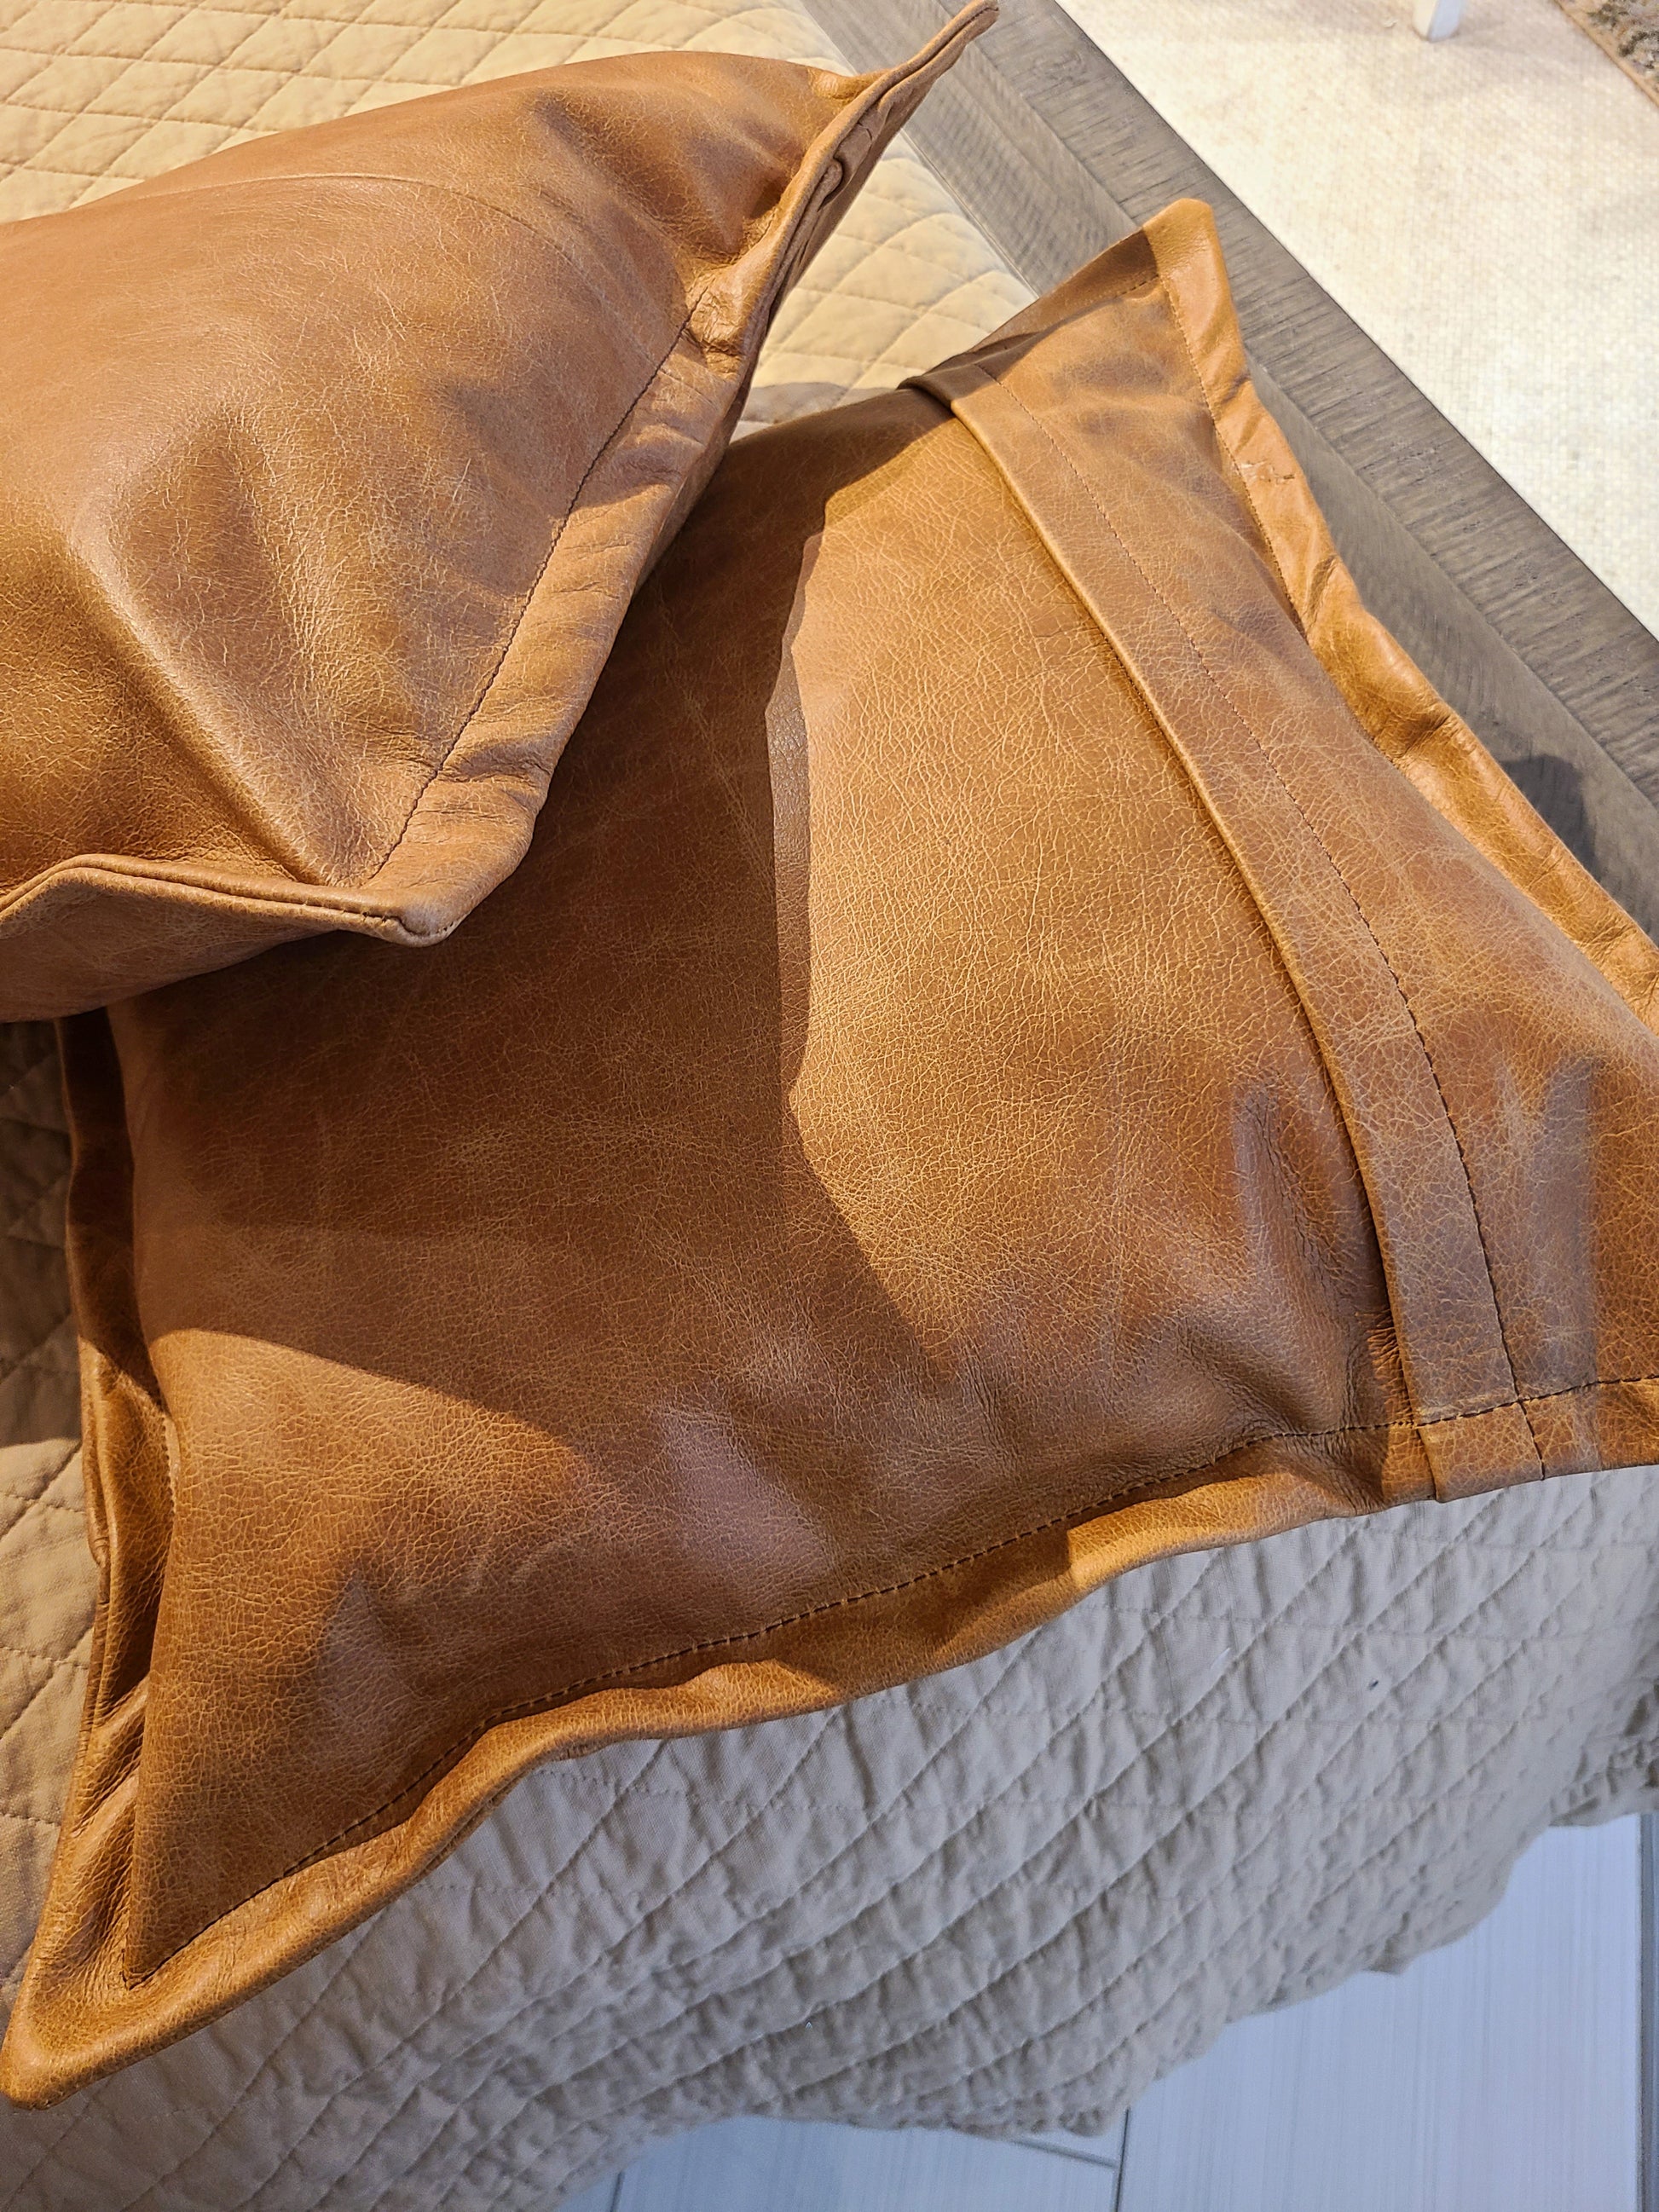 100% Lambskin Leather Caramel Brown Throw Pillow Cover - 22 x 22-Status Co. Leather Studio